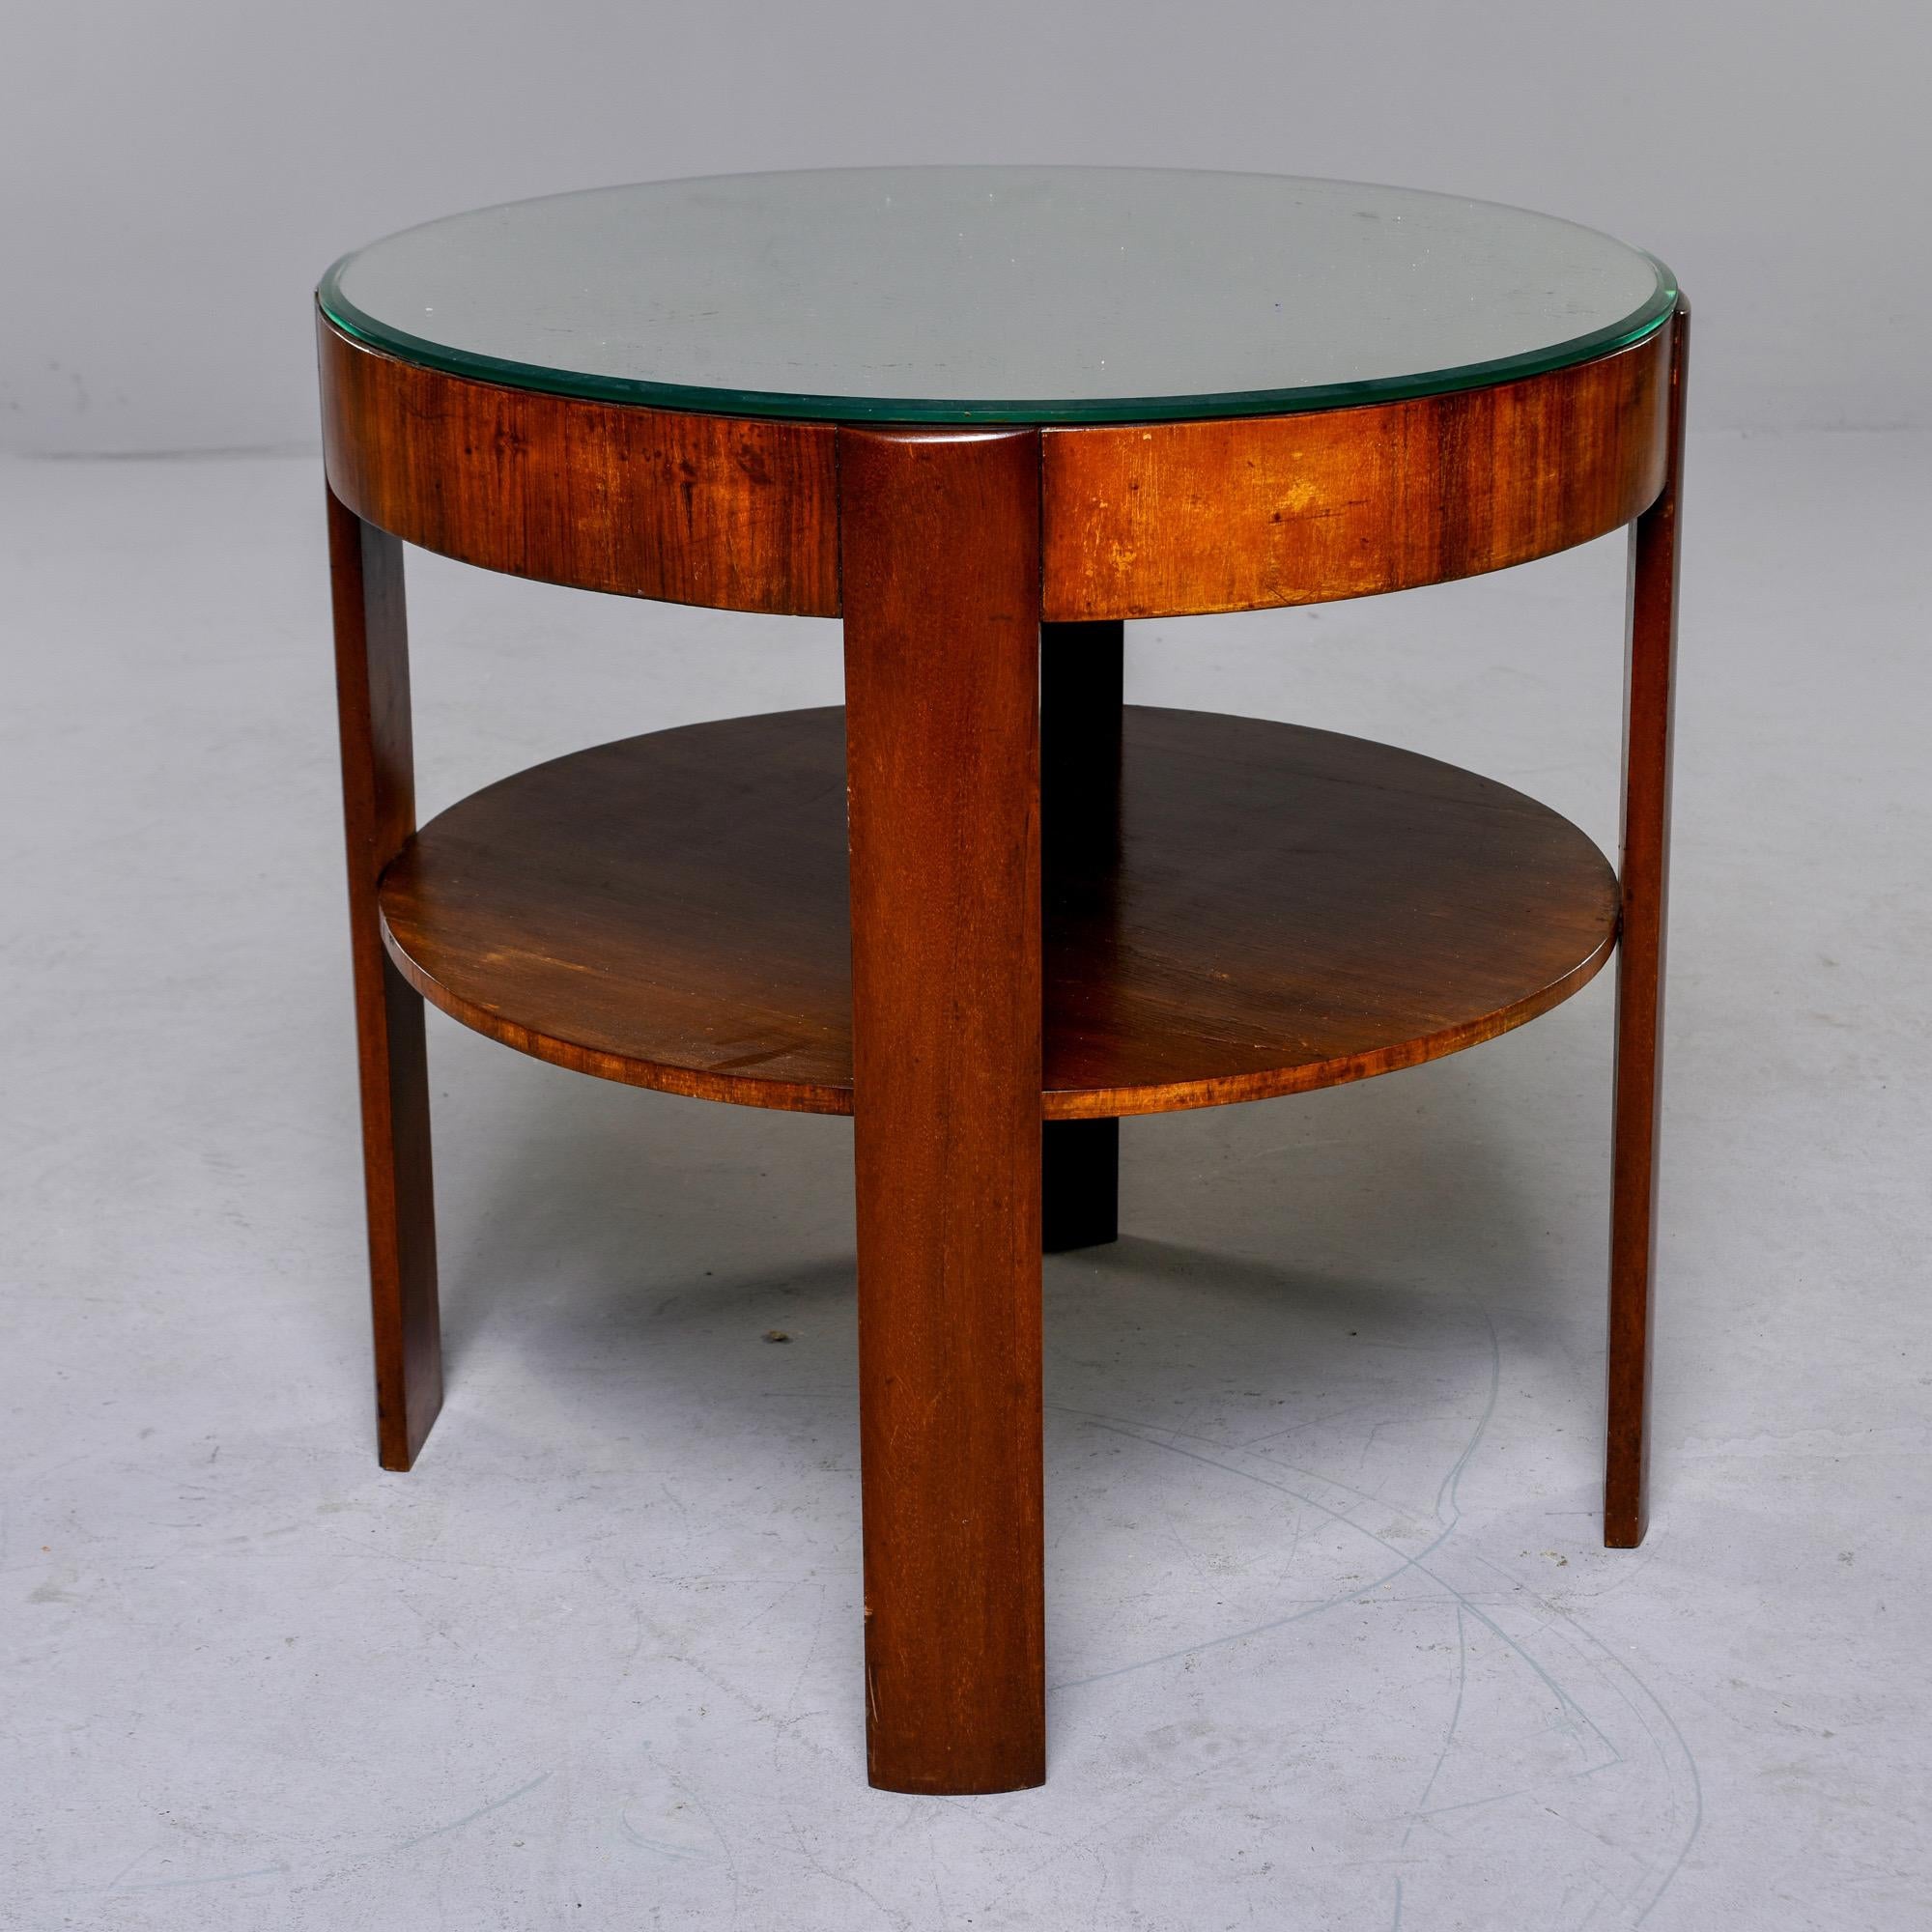 20th Century French Round Mahogany Side Table with Mirror Top